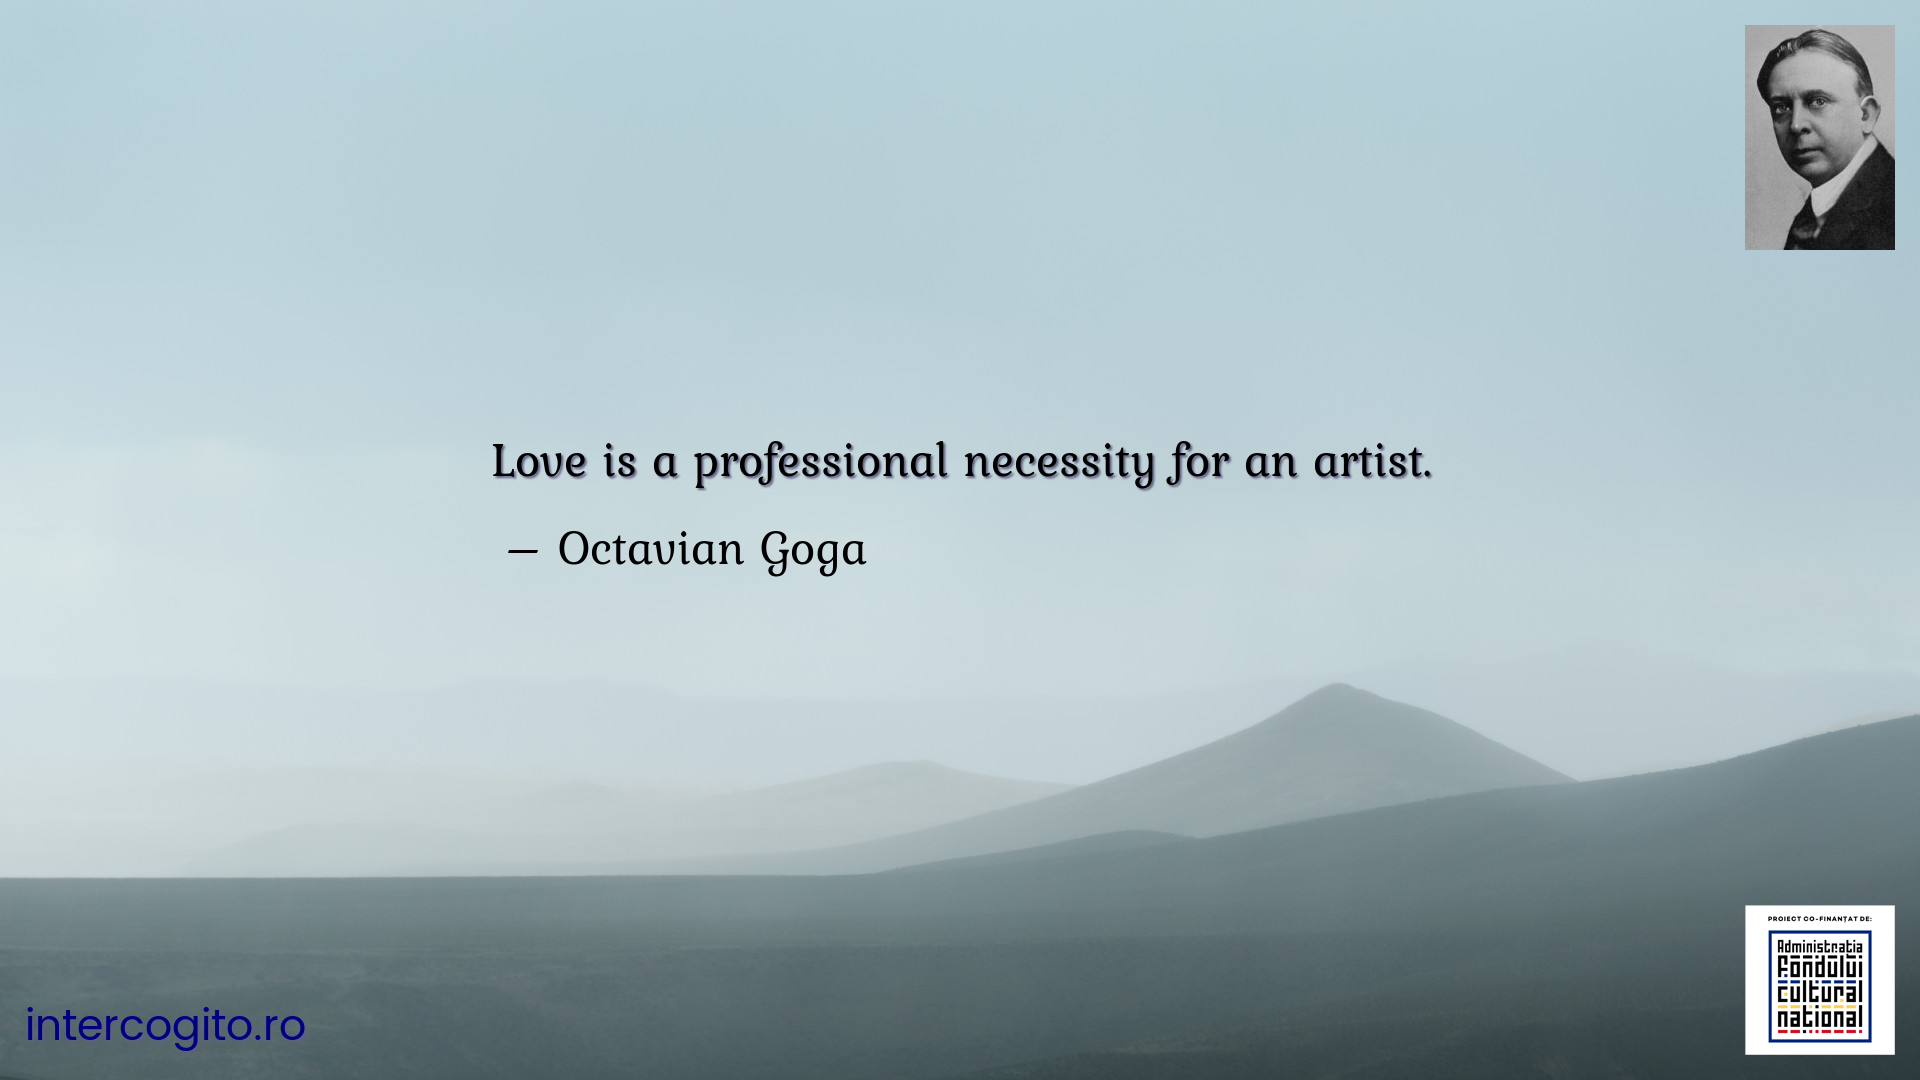 Love is a professional necessity for an artist.